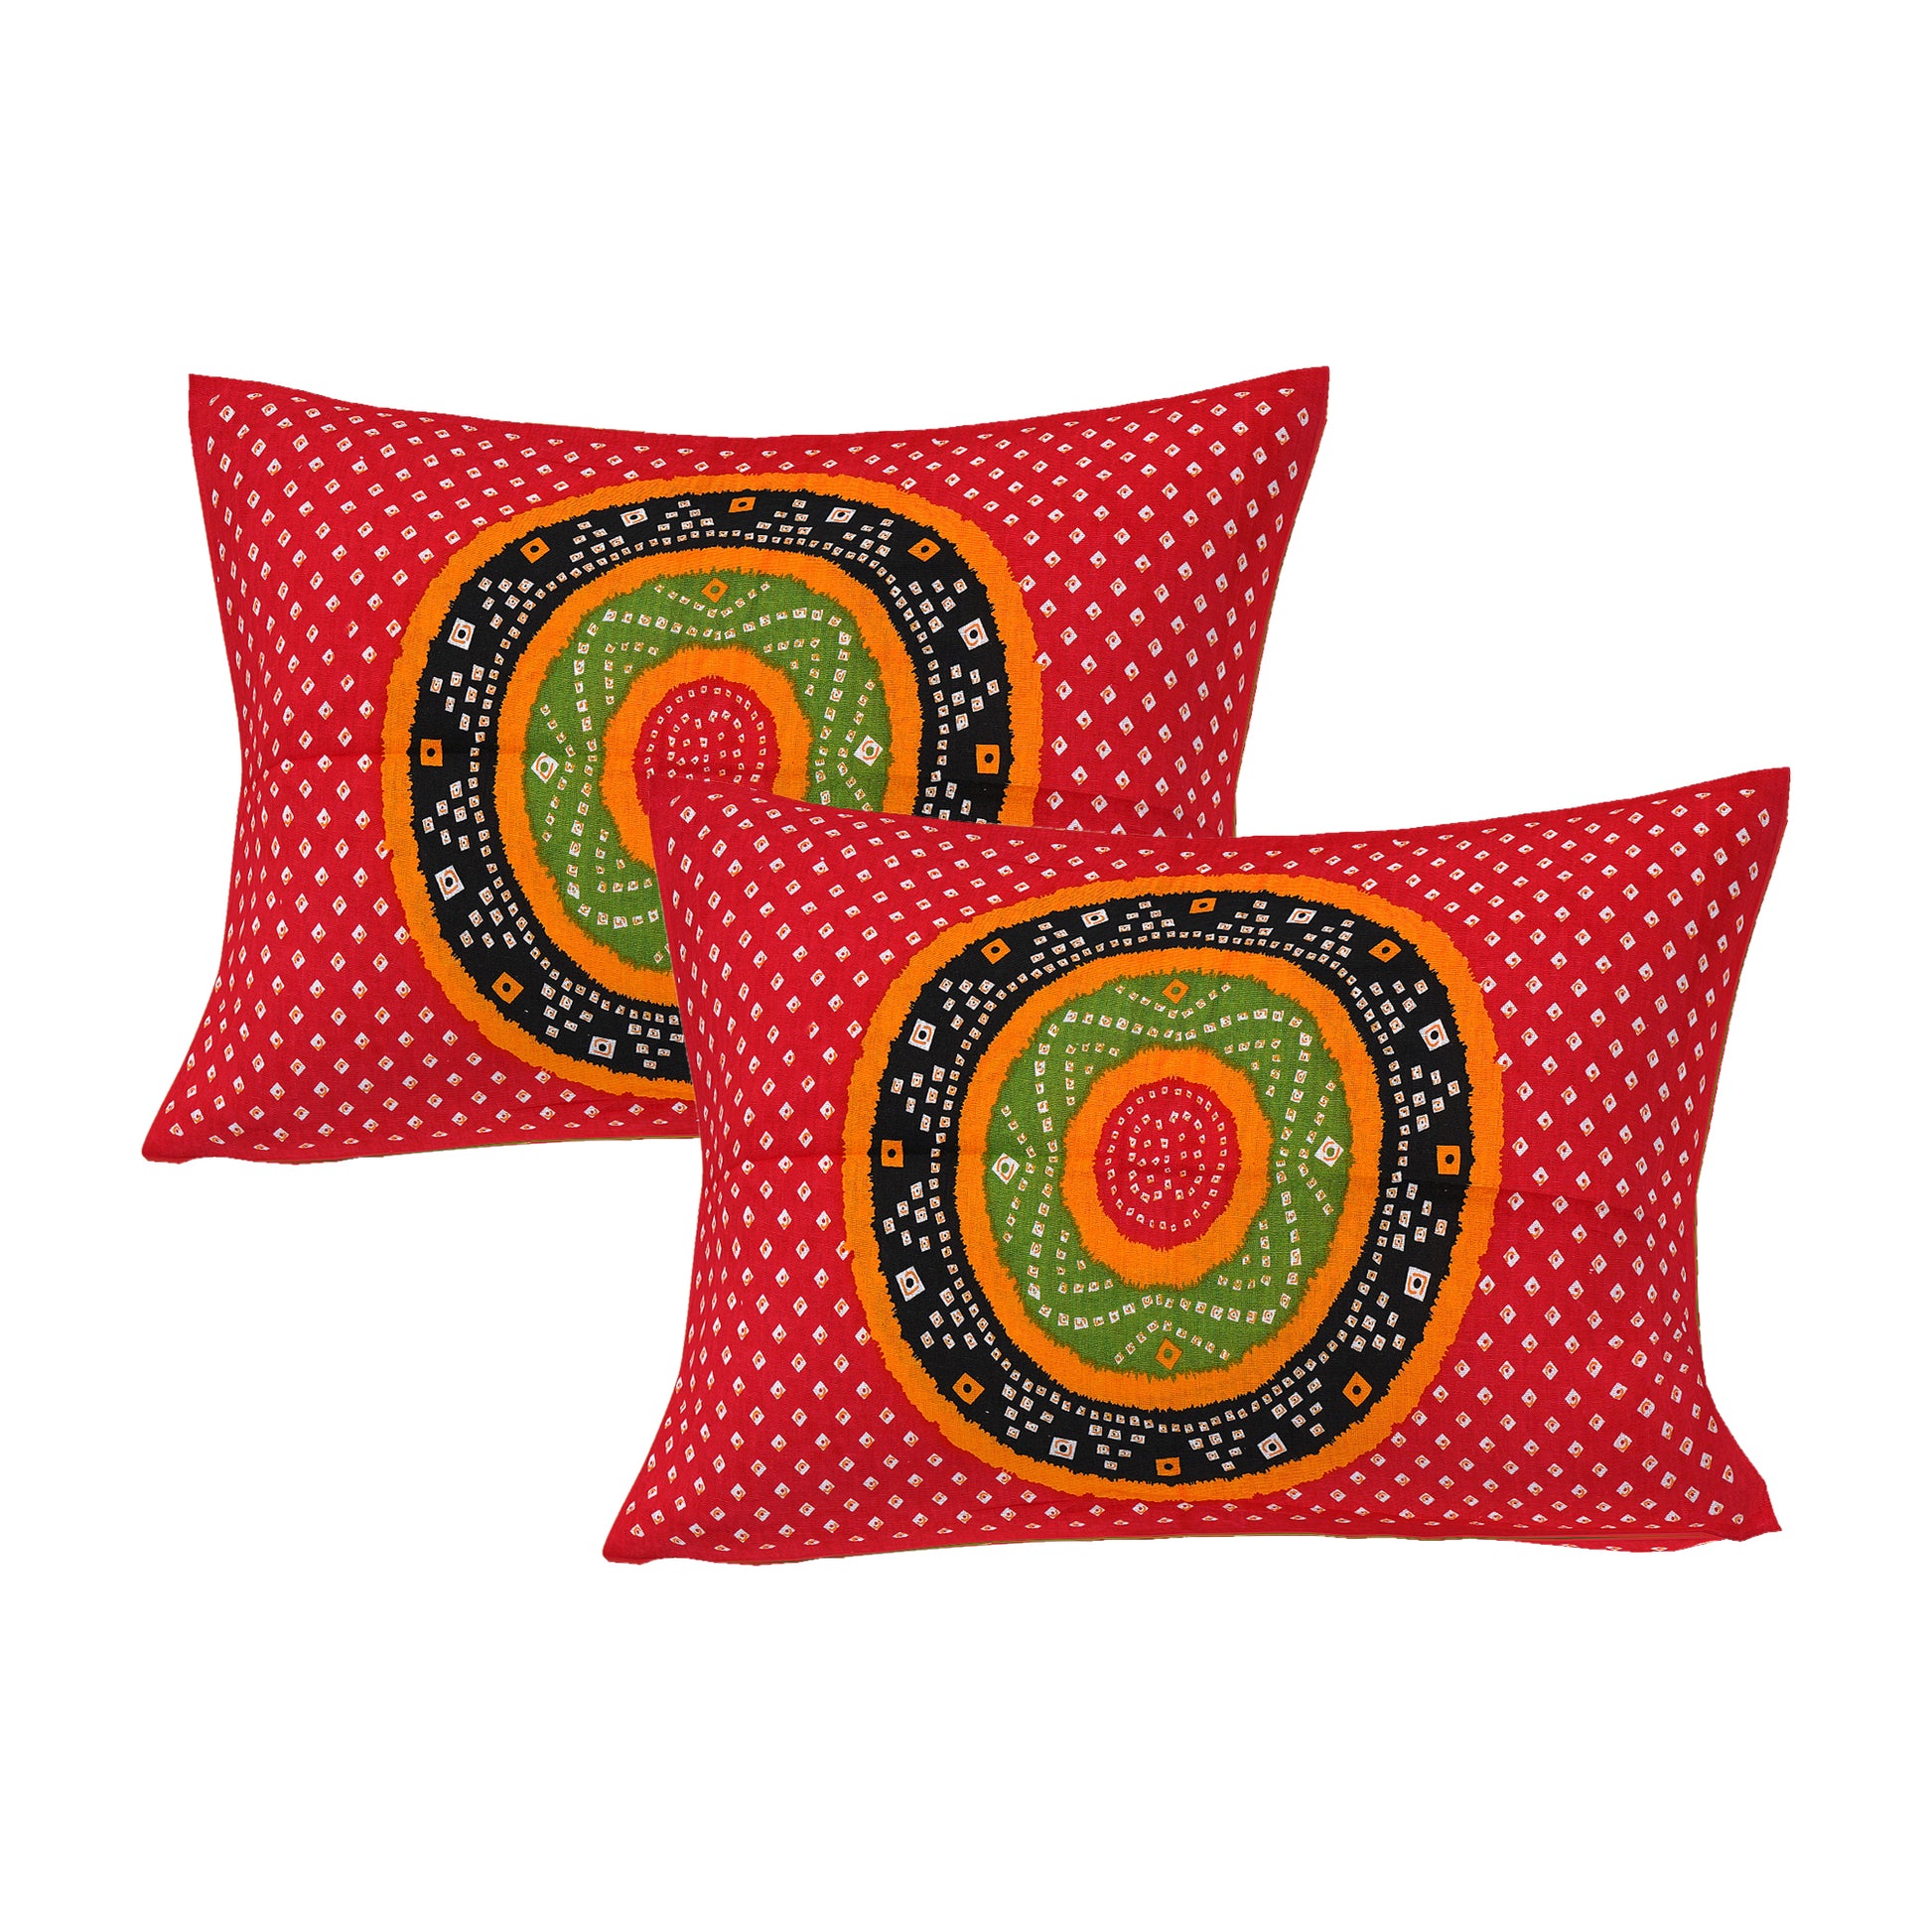 Jaipuri 100% Cotton Double Size Bedsheet with 2 Pillow Covers ( Red , 280 TC ) JAIPUR PRINTS